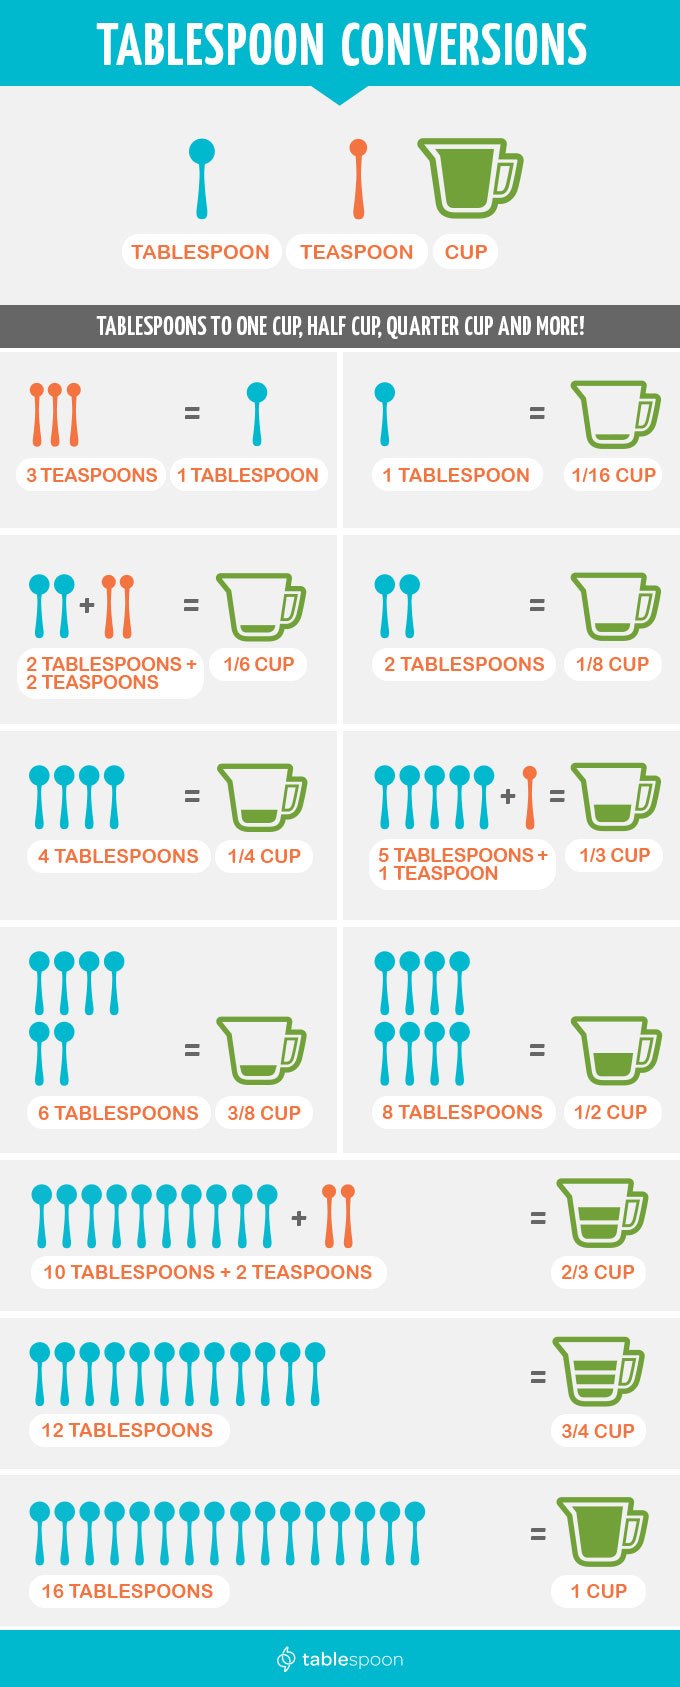 17 how many 2/3 cups make 1 cup Full Guide